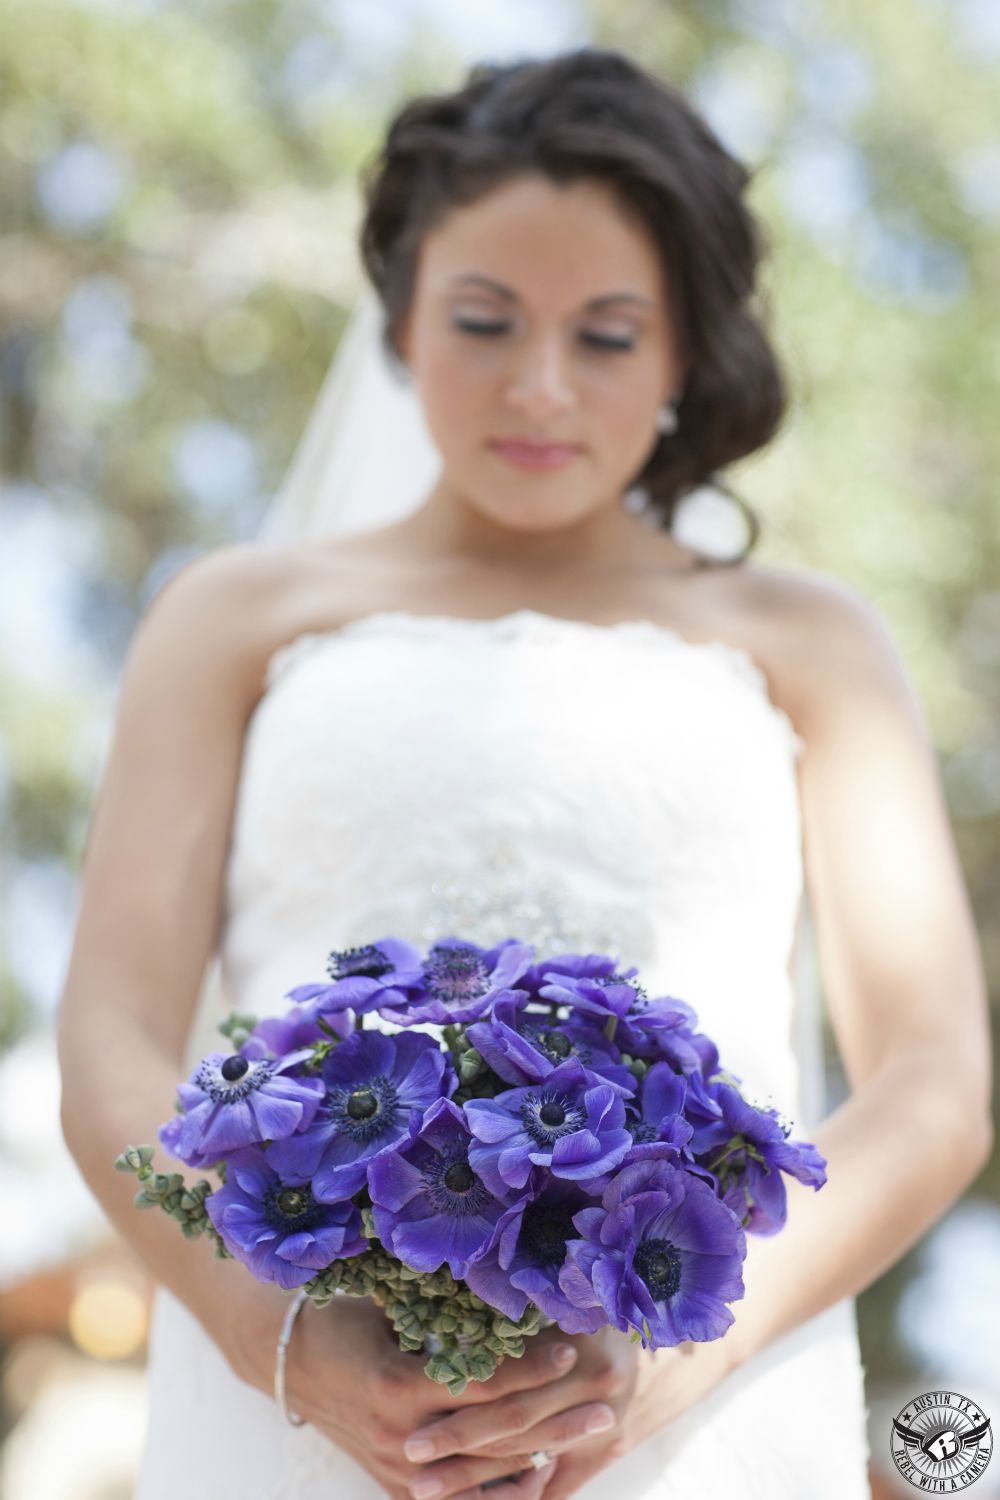 Gorgous brunette bride in white, strapless lace bridal gown by Priscilla of Boston holds and looks down at exquisite purple anemone bridal bouquet by the Austin florist Visual Lyrics Floral Artistry at Nature's Point Austin wedding venue.